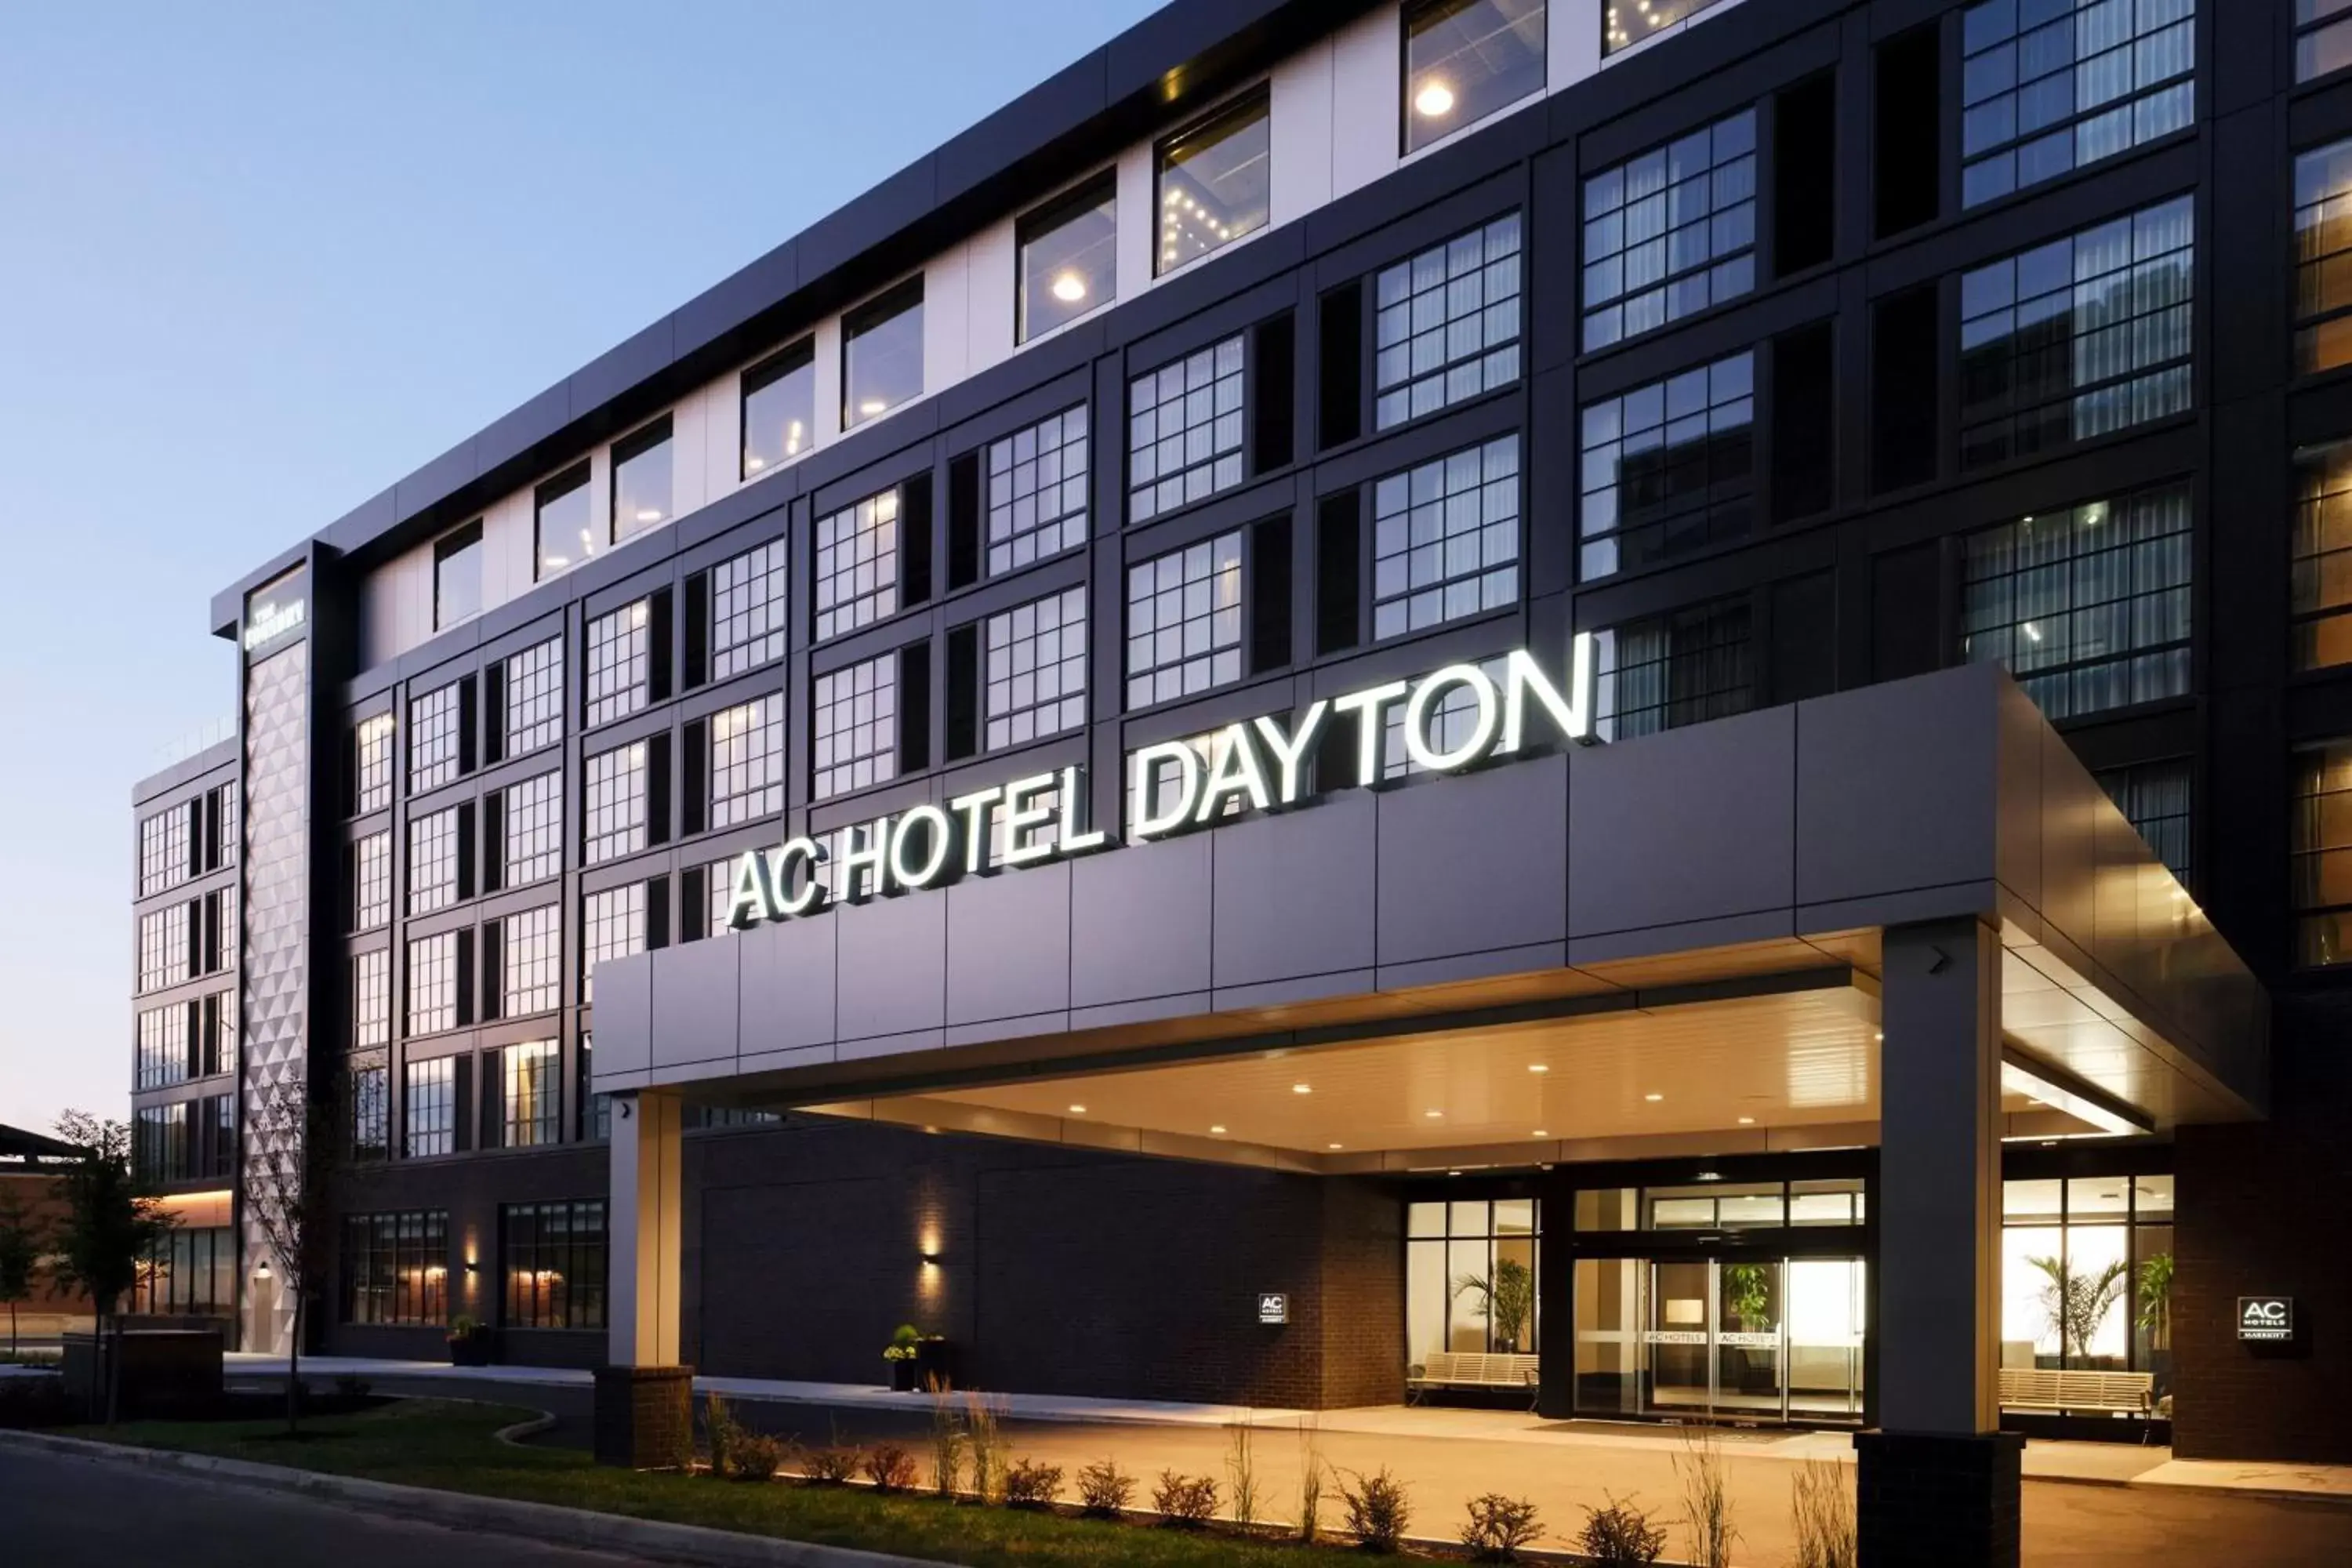 Property Building in AC Hotel by Marriott Dayton